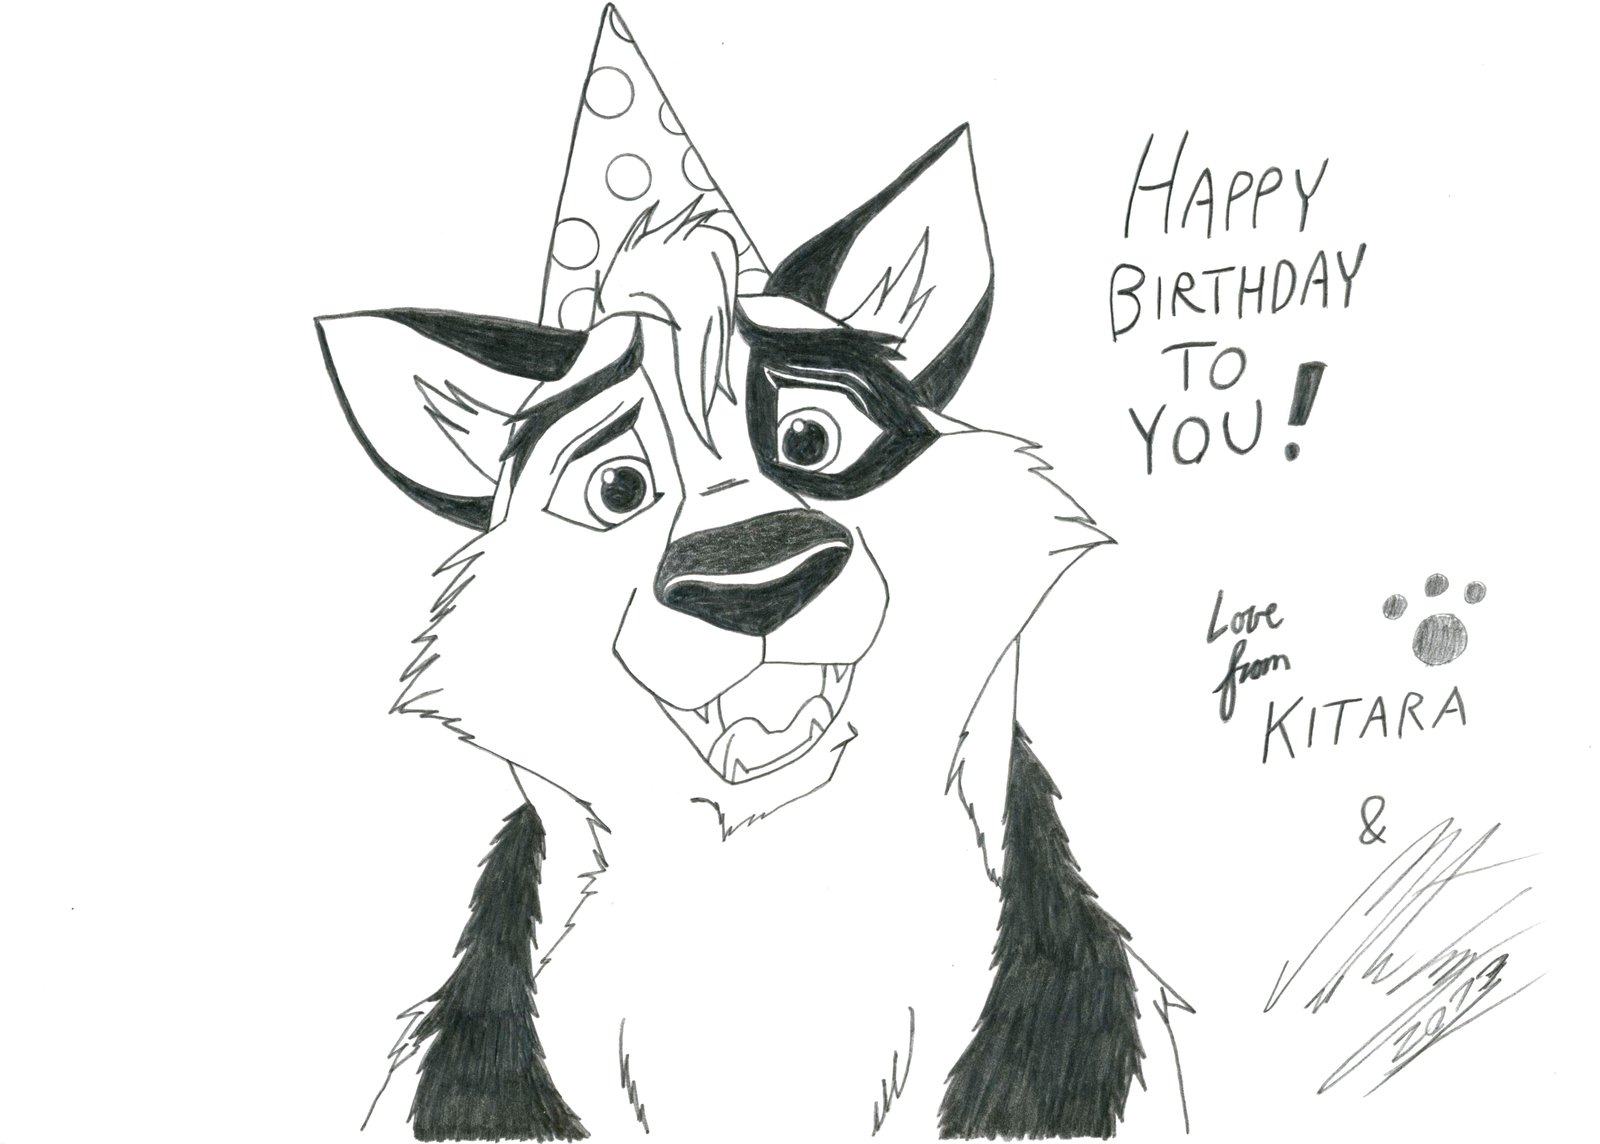 DeviantArt: More Like My HAPPY BIRTHDAY greeting card by MortenEng21